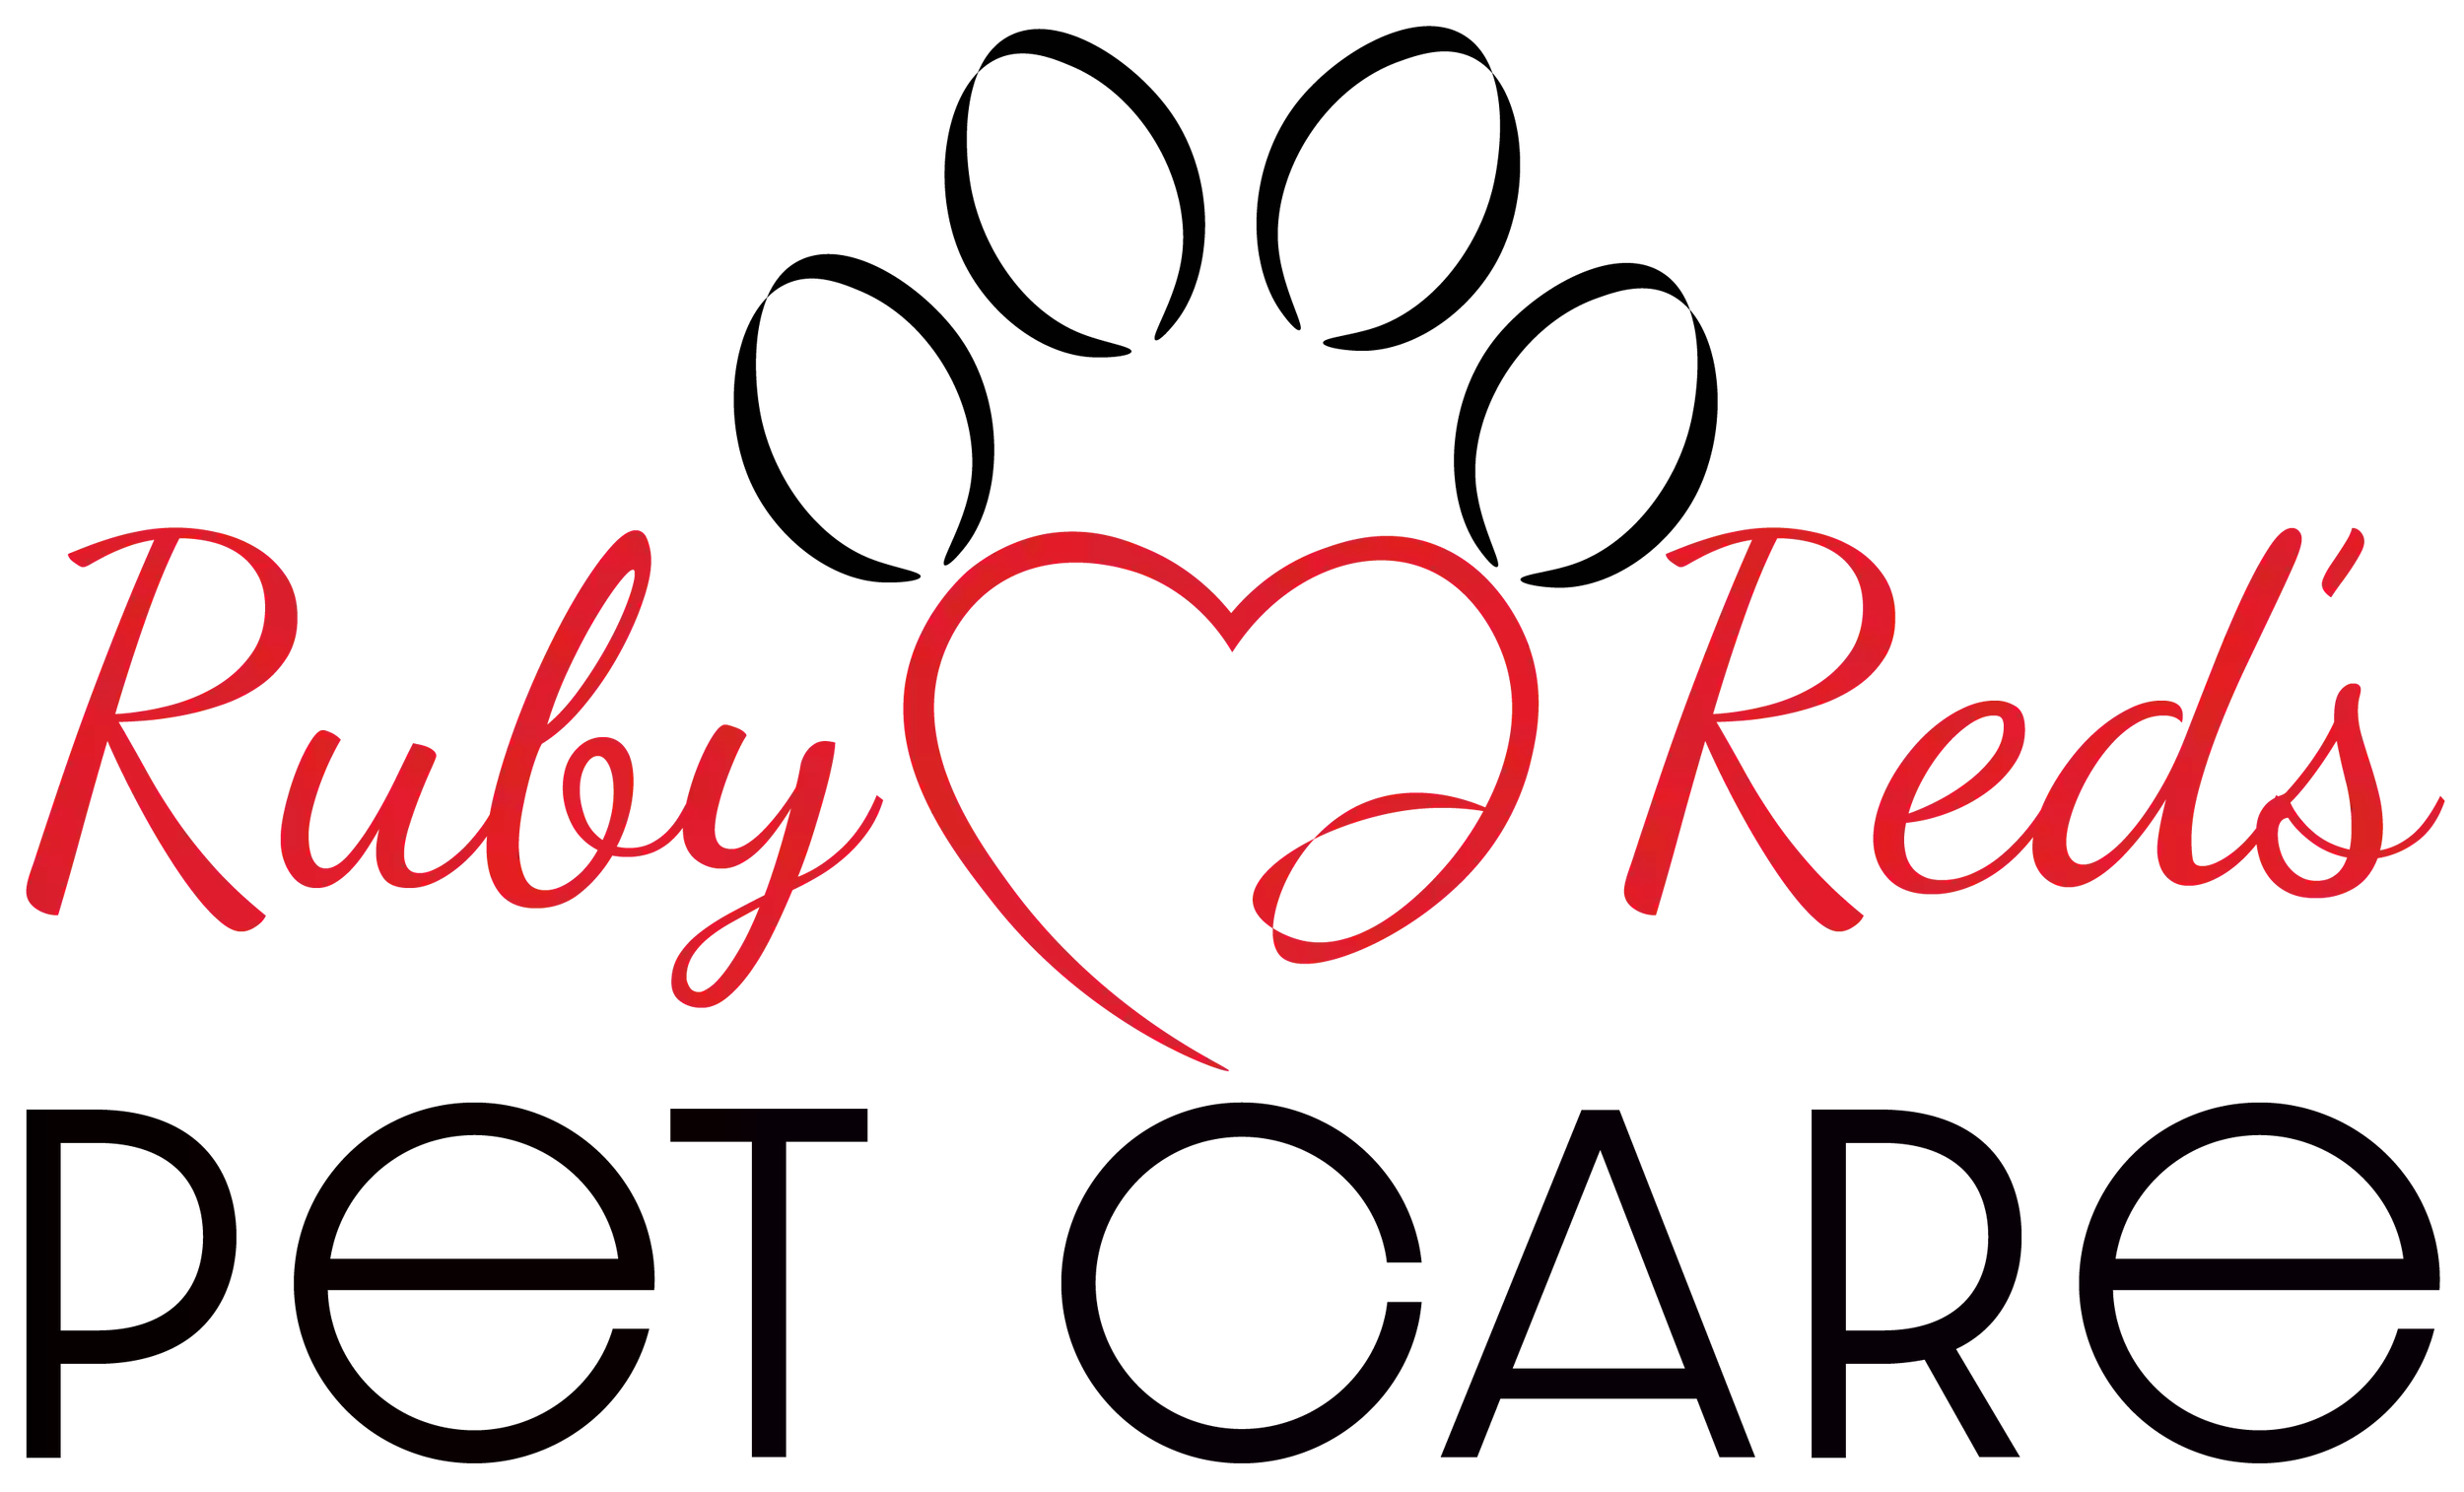 RubyRed's Pet Care